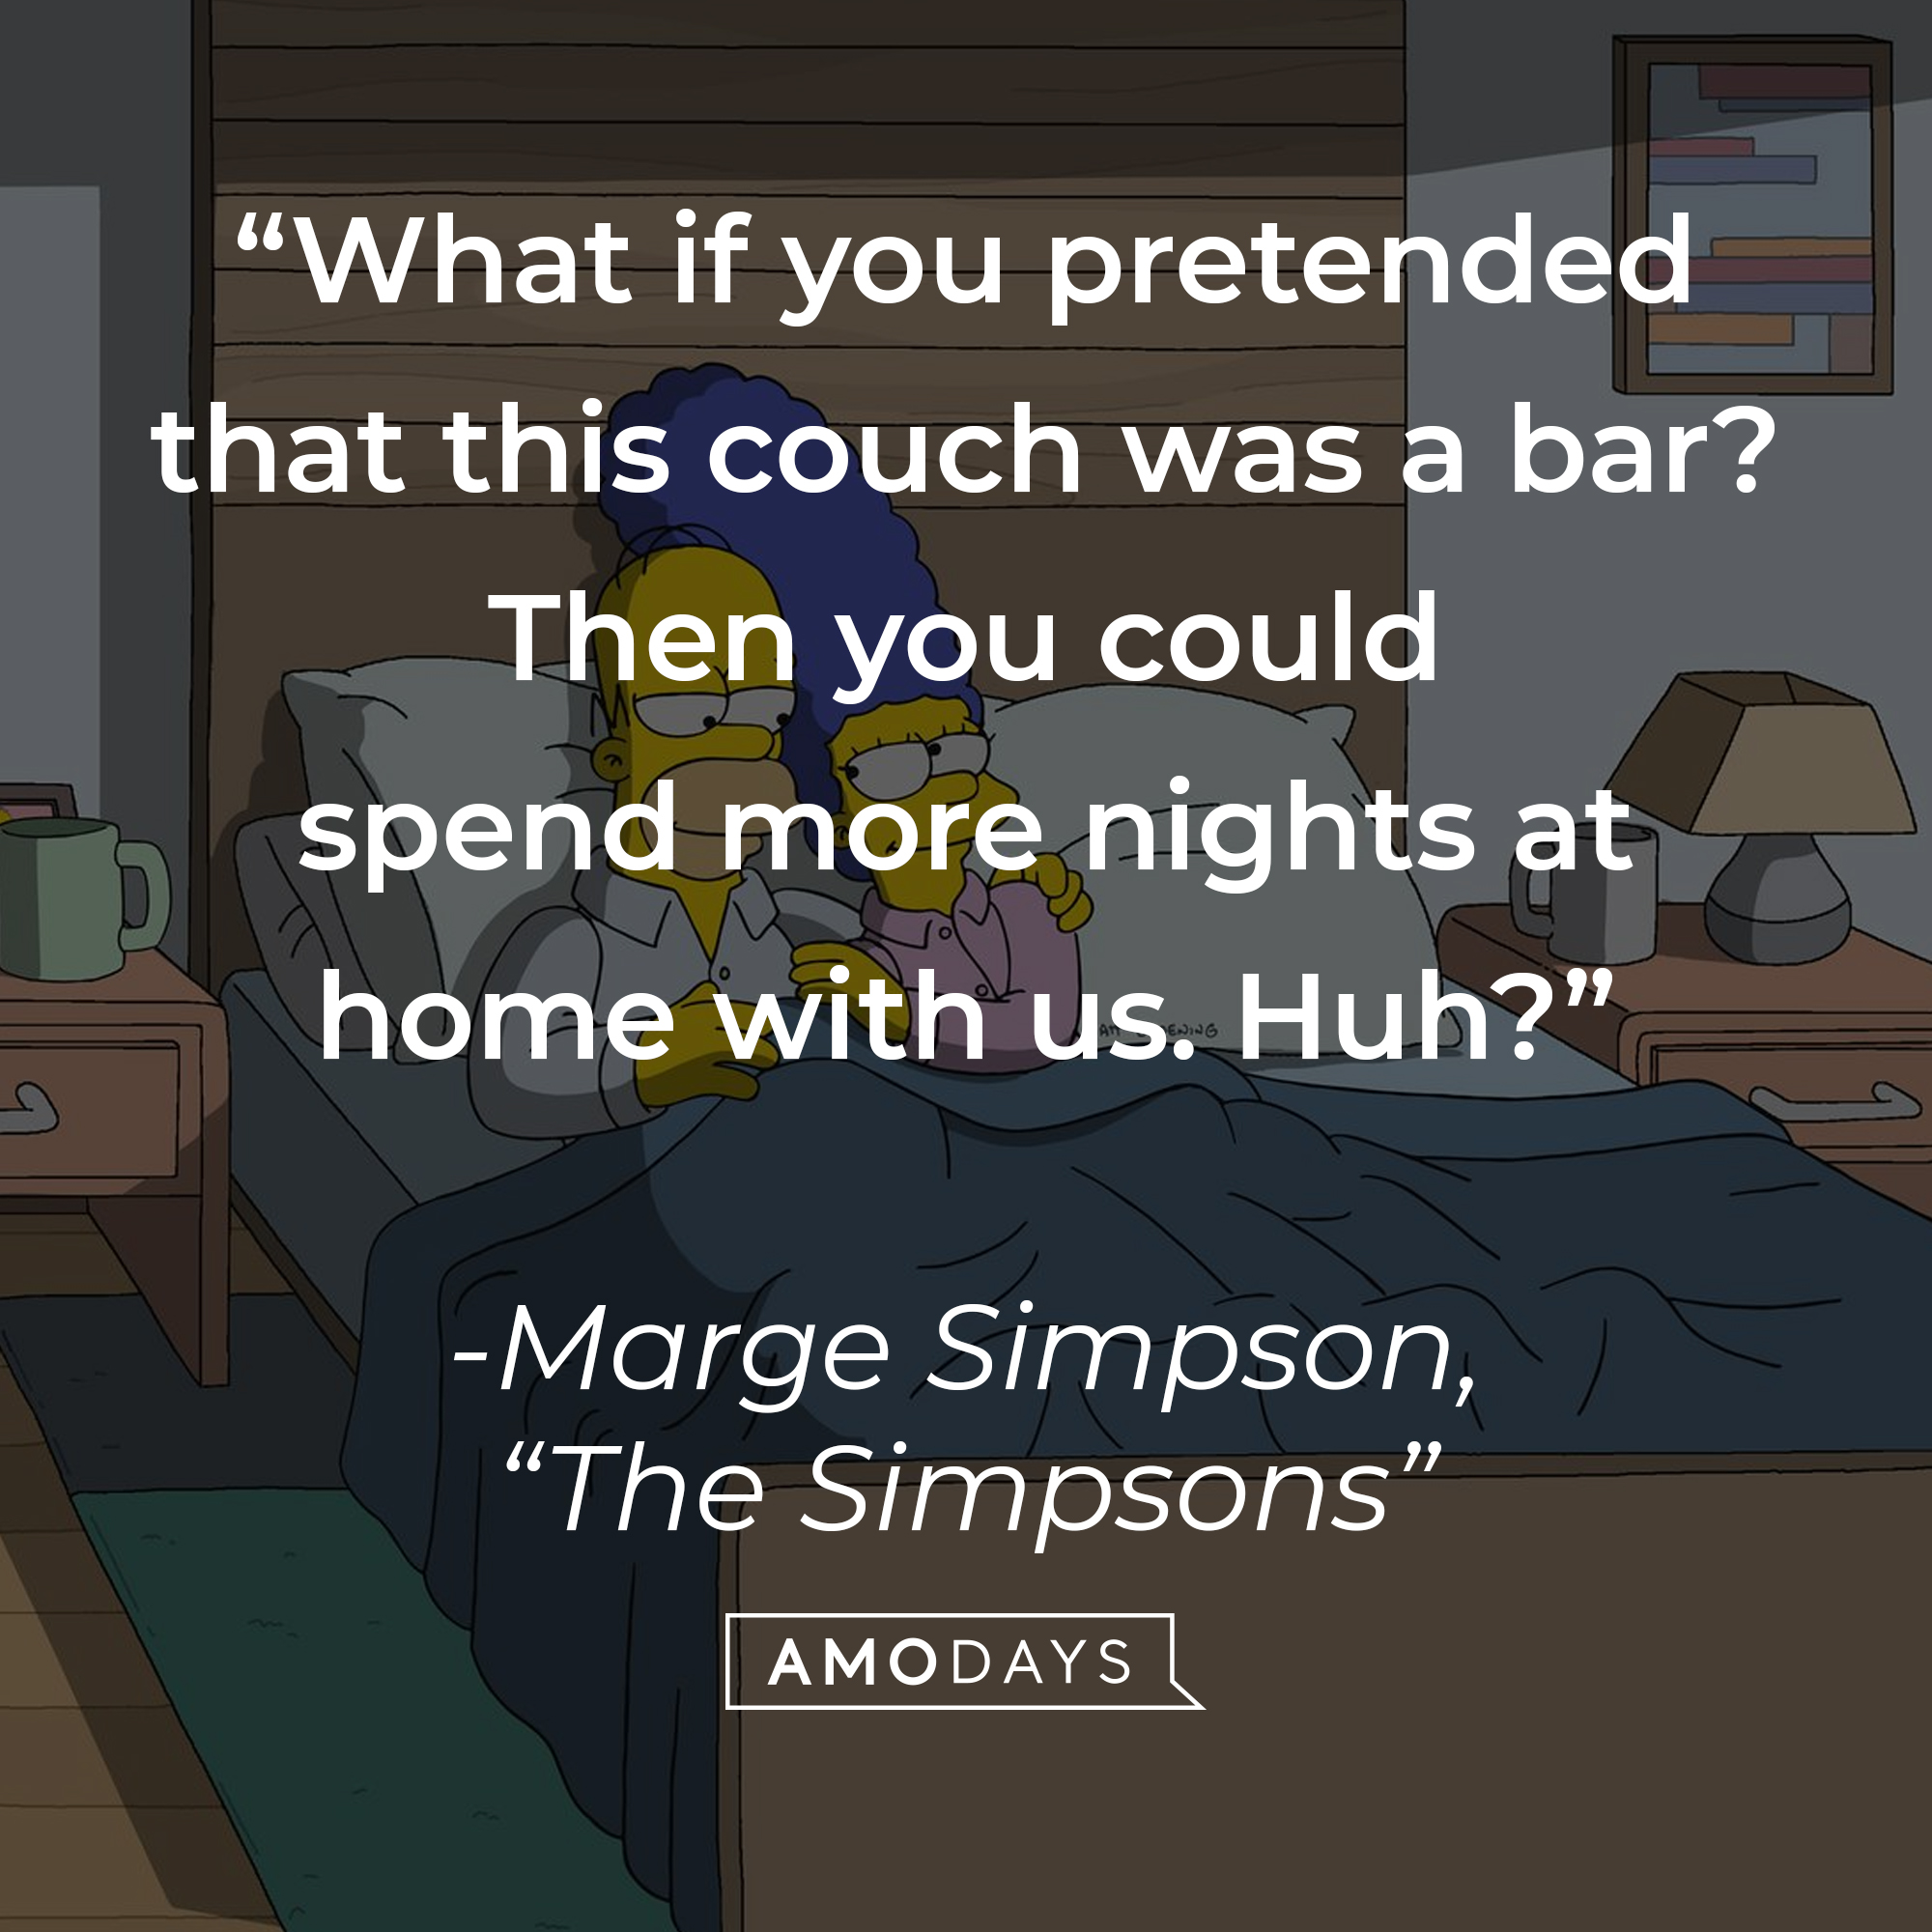 Marge Simpson's quote: "What if you pretended that this couch was a bar? Then you could spend more nights at home with us. Huh?" | Image: facebook.com/TheSimpsons